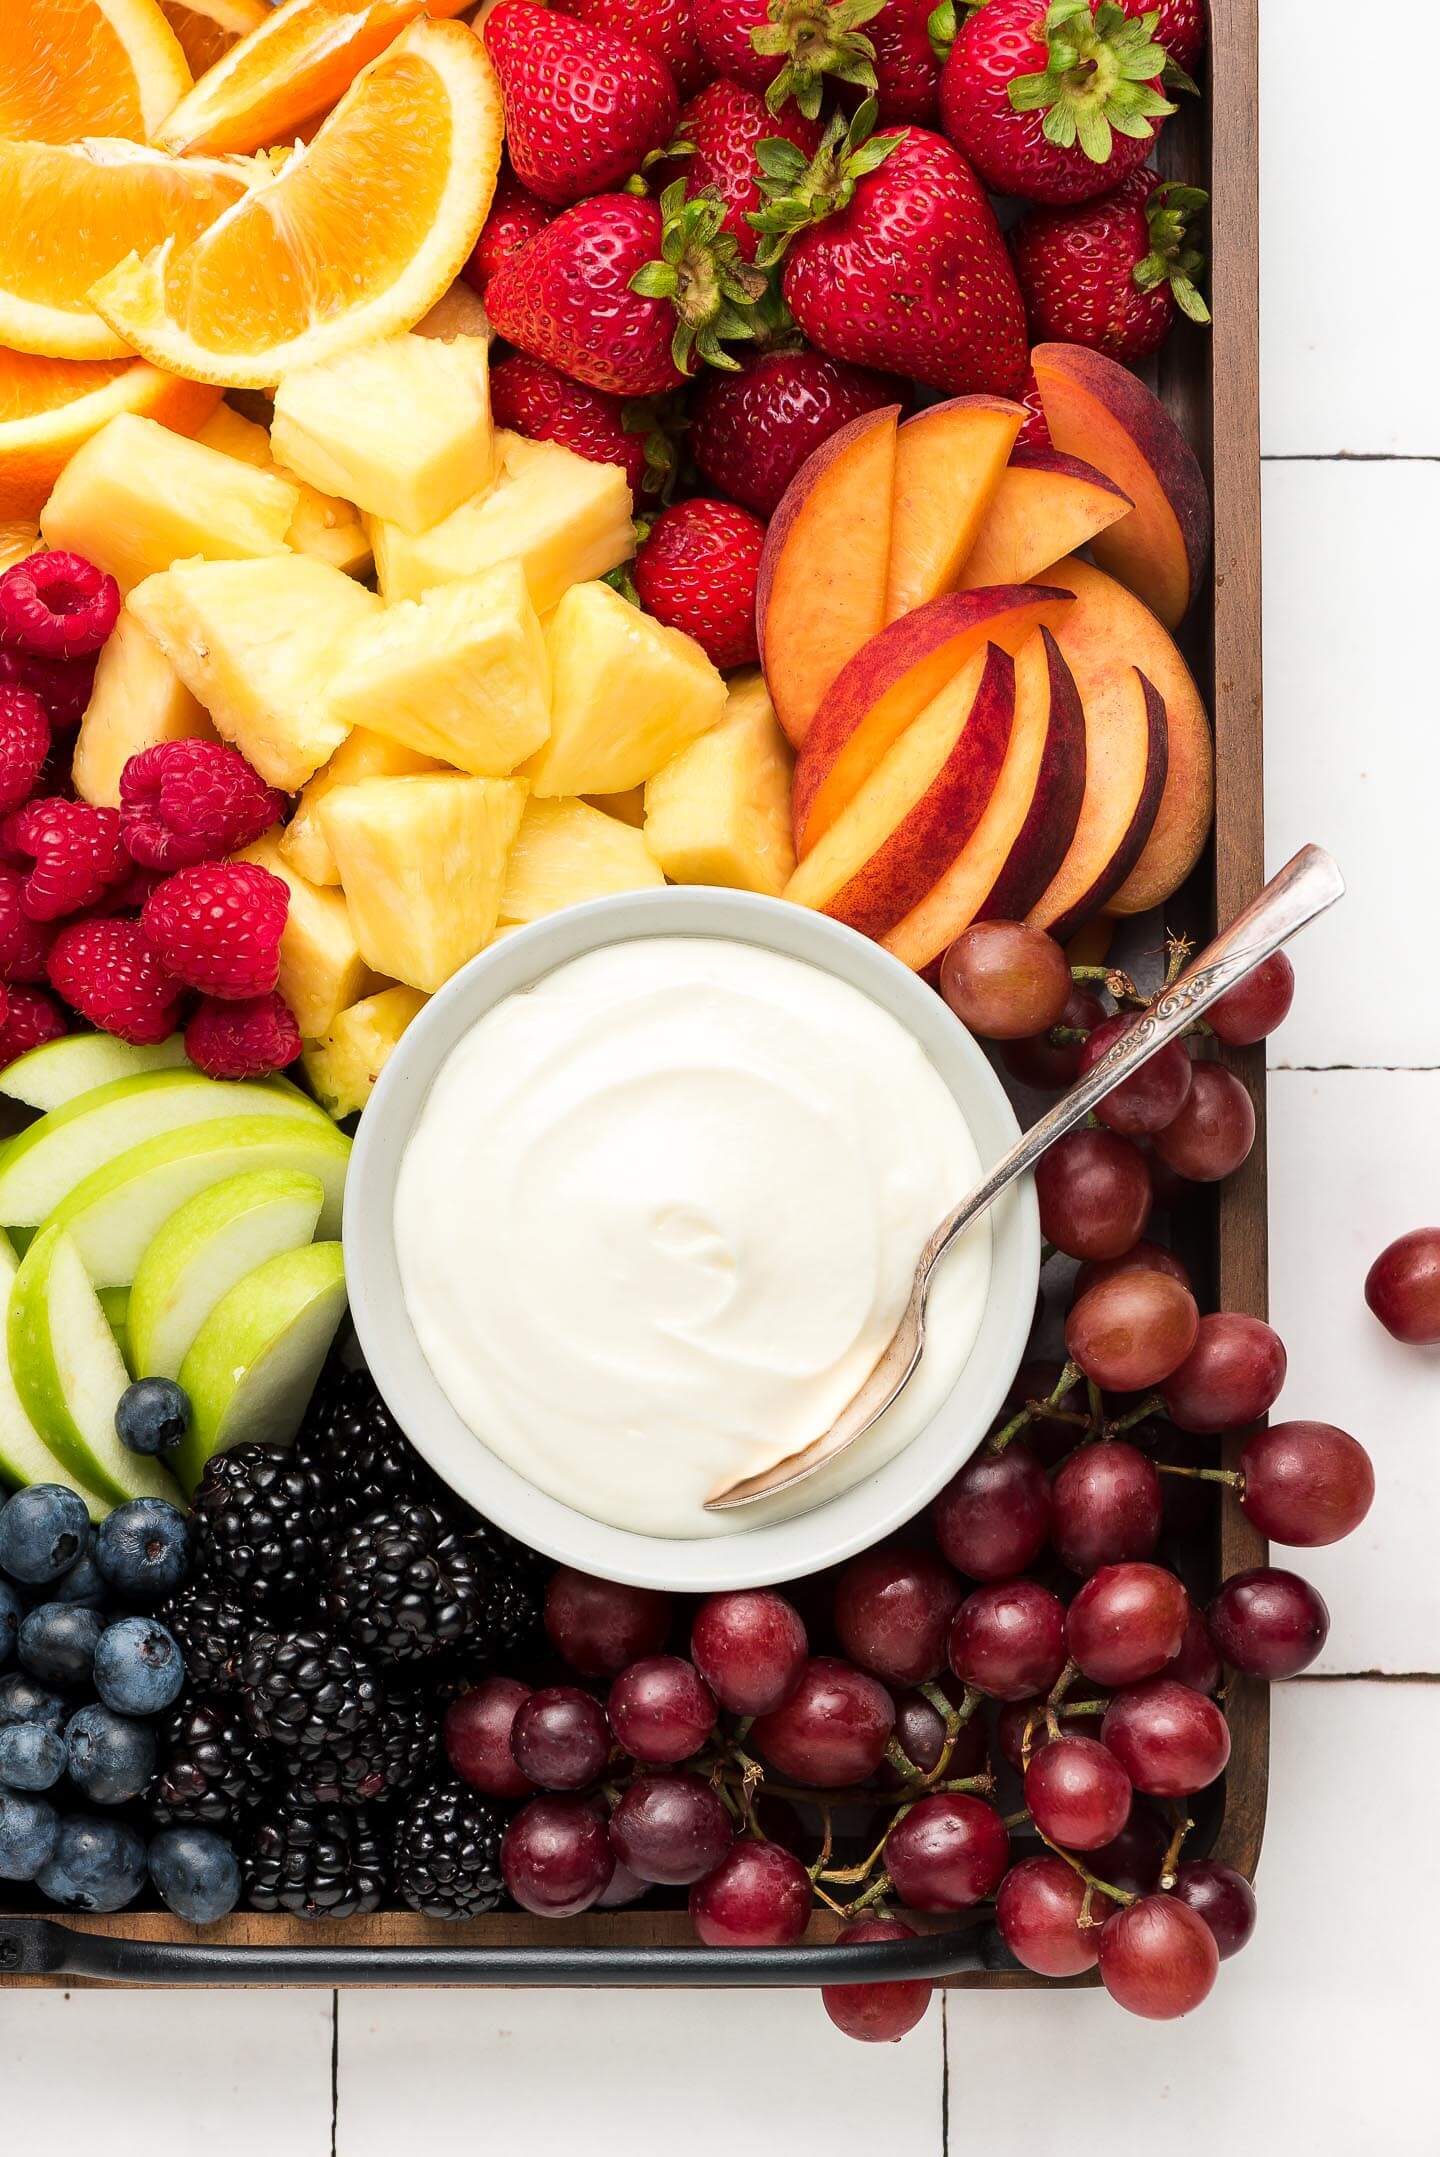 A wooden tray of fruit and Cream Cheese Fruit Dip on a tile surface.